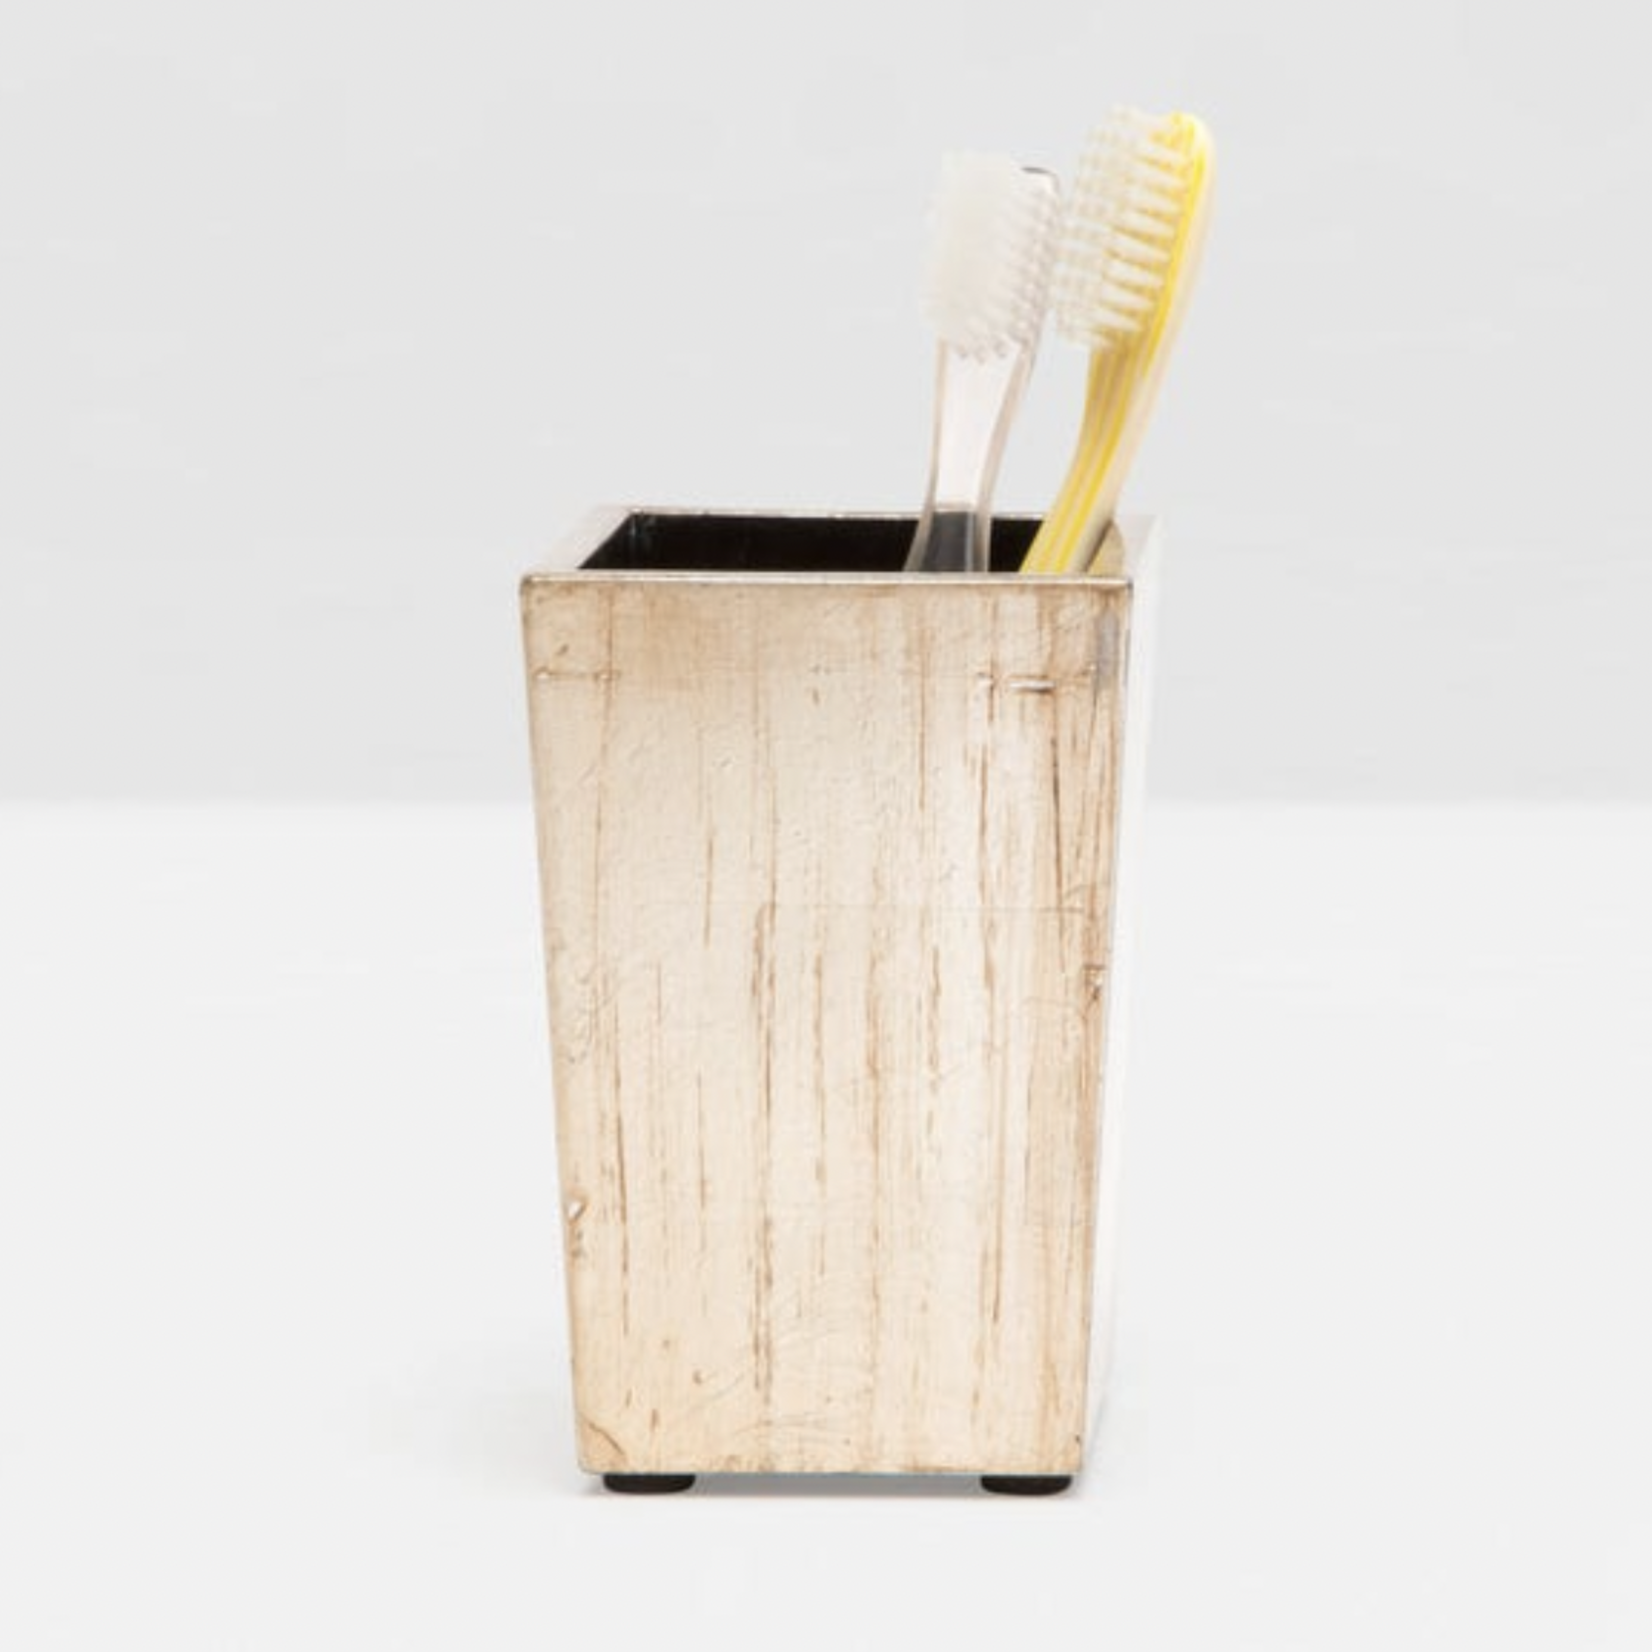 Tanlay Square Toothbrush Holder, Lacquered Silver Leaf